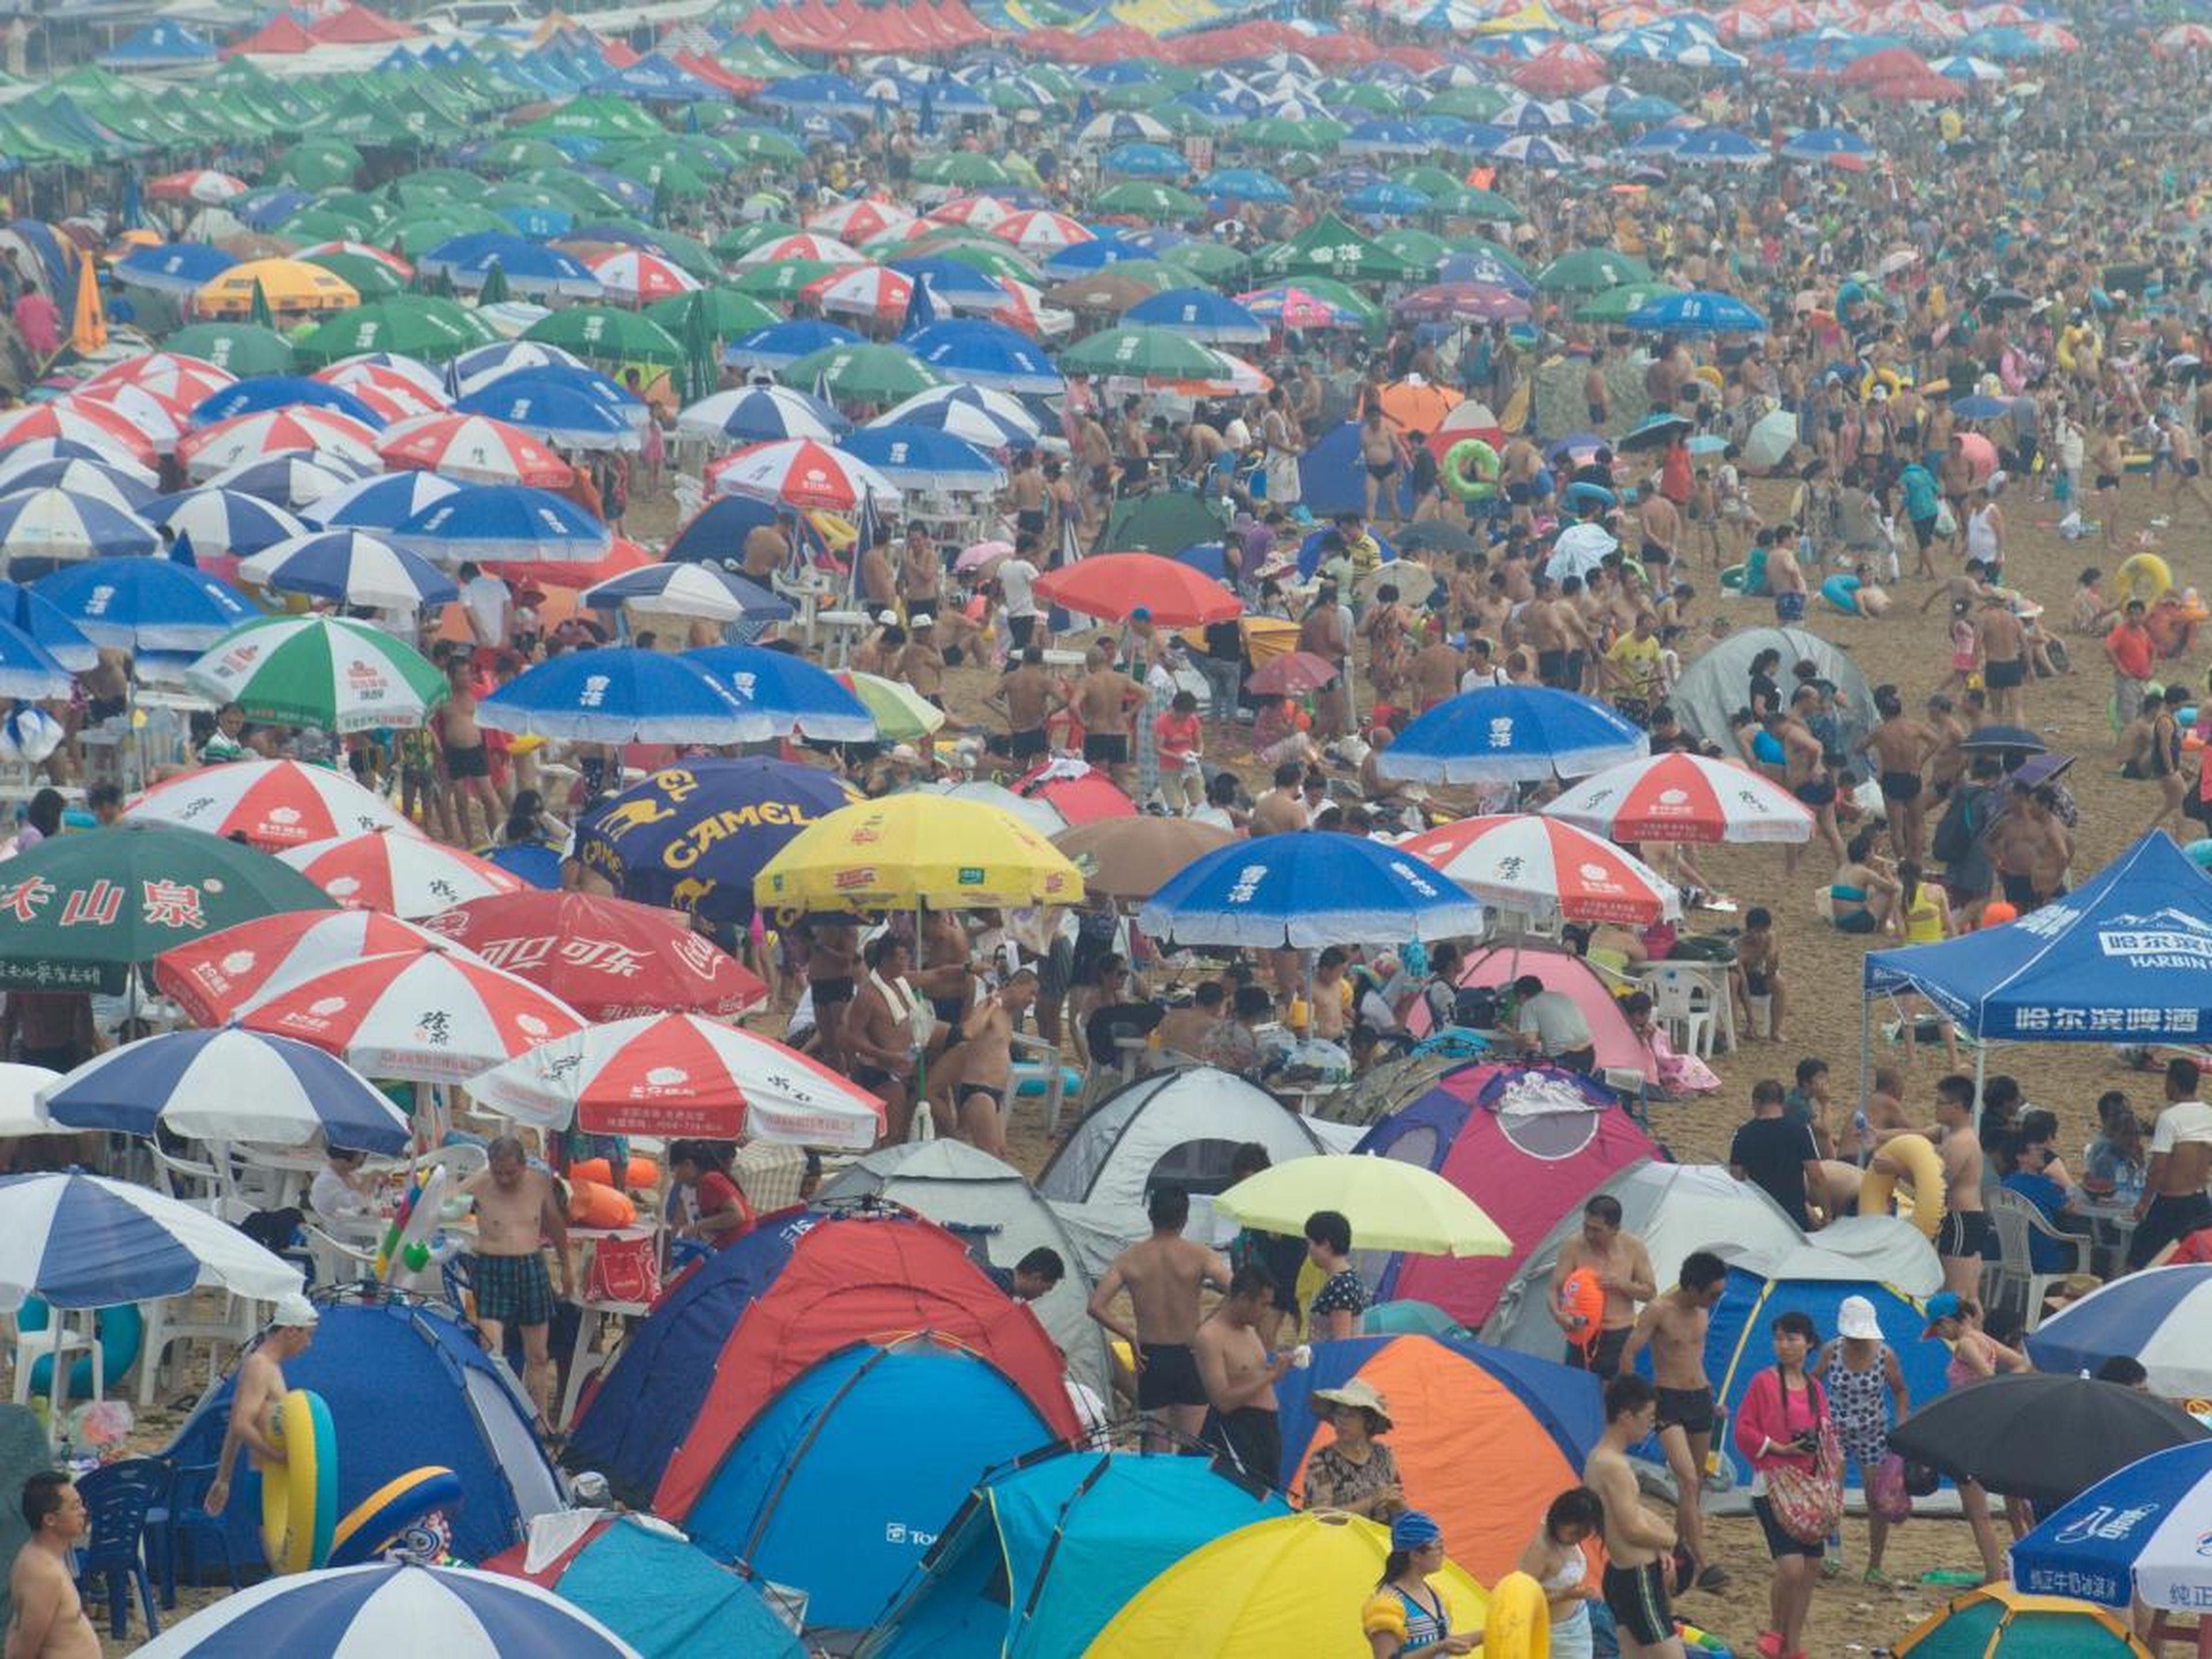 But beach vacationers will have to fight to get a spot, judging from photos such as this one from Fujiazhuang beach in Dalian on a nearly 90-degree day in 2015. "I went on a weekday and almost could only see the water through